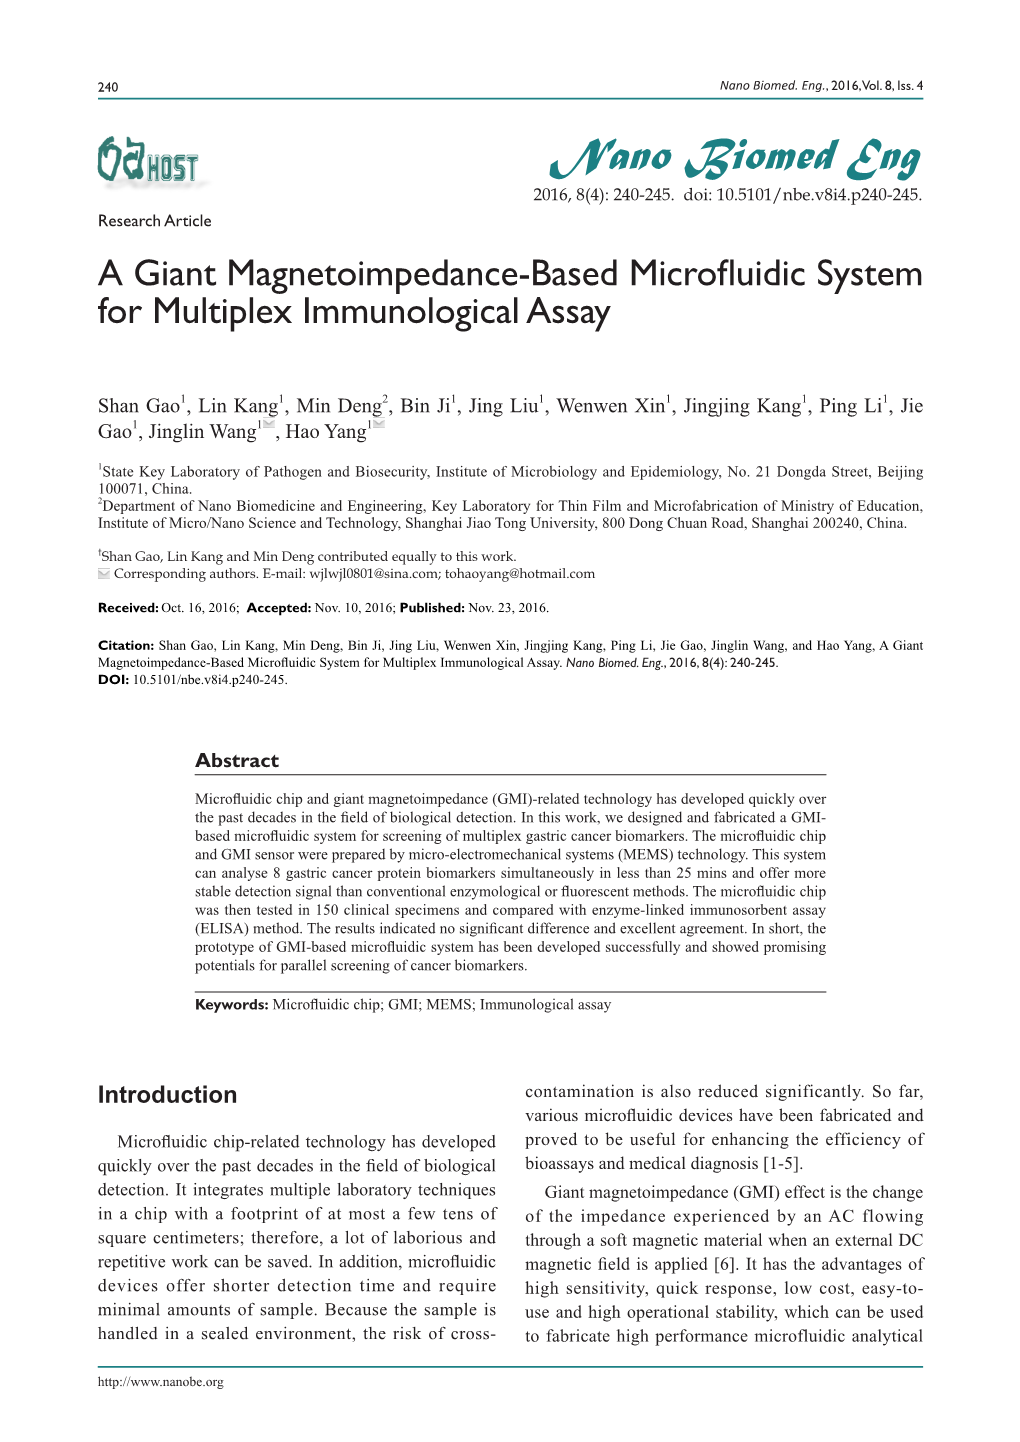 A Giant Magnetoimpedance-Based Microfluidic System for Multiplex Immunological Assay